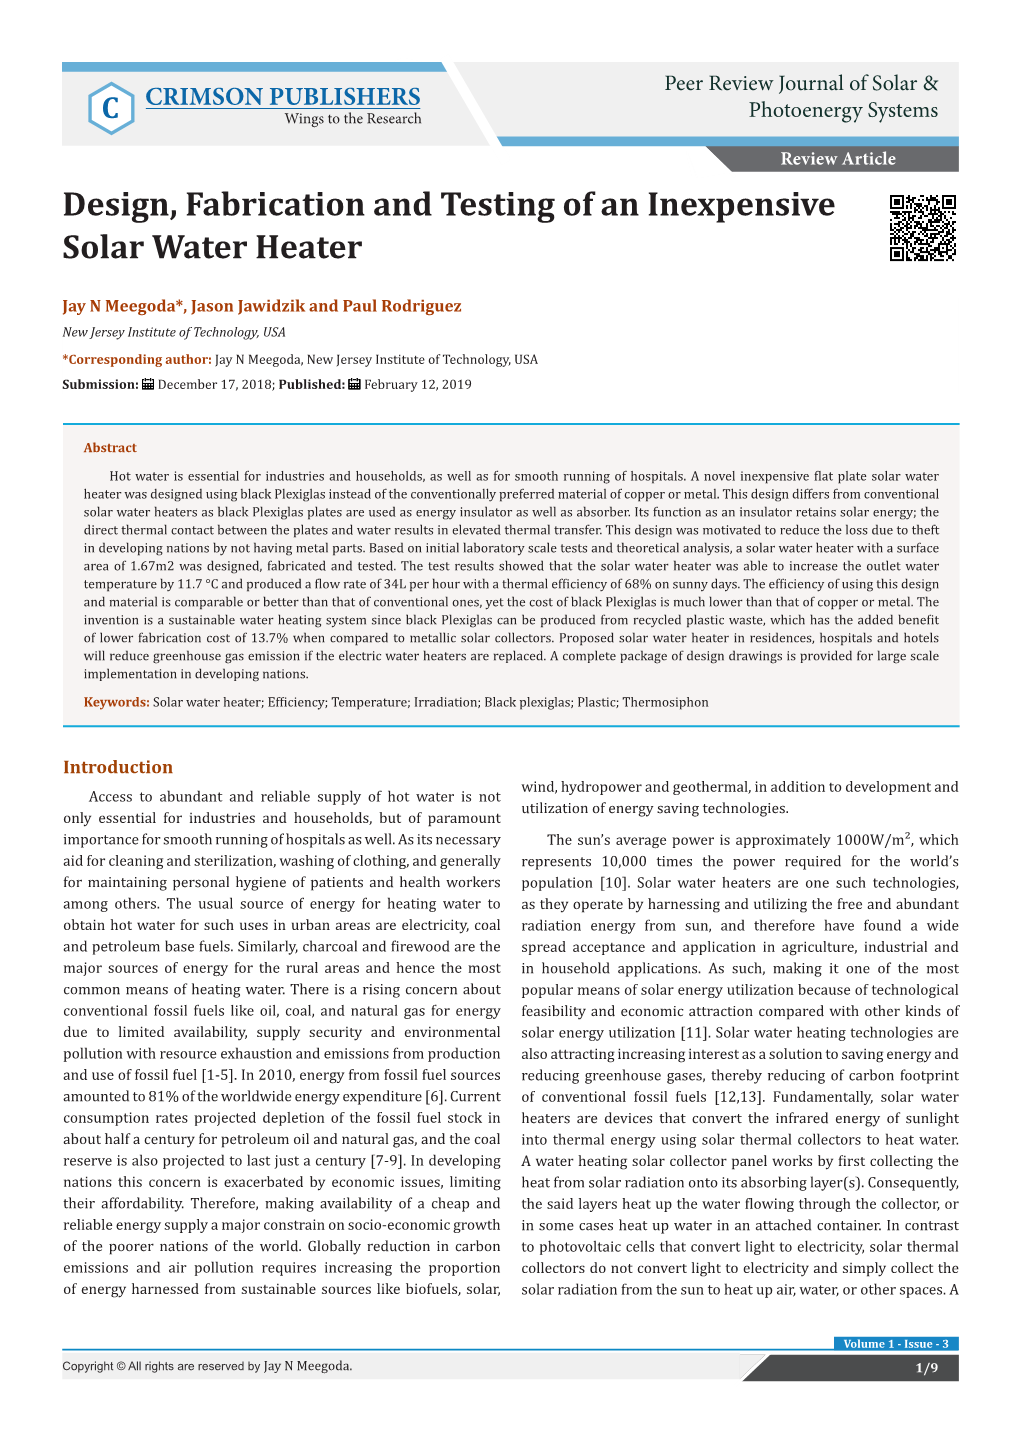 Design, Fabrication and Testing of an Inexpensive Solar Water Heater